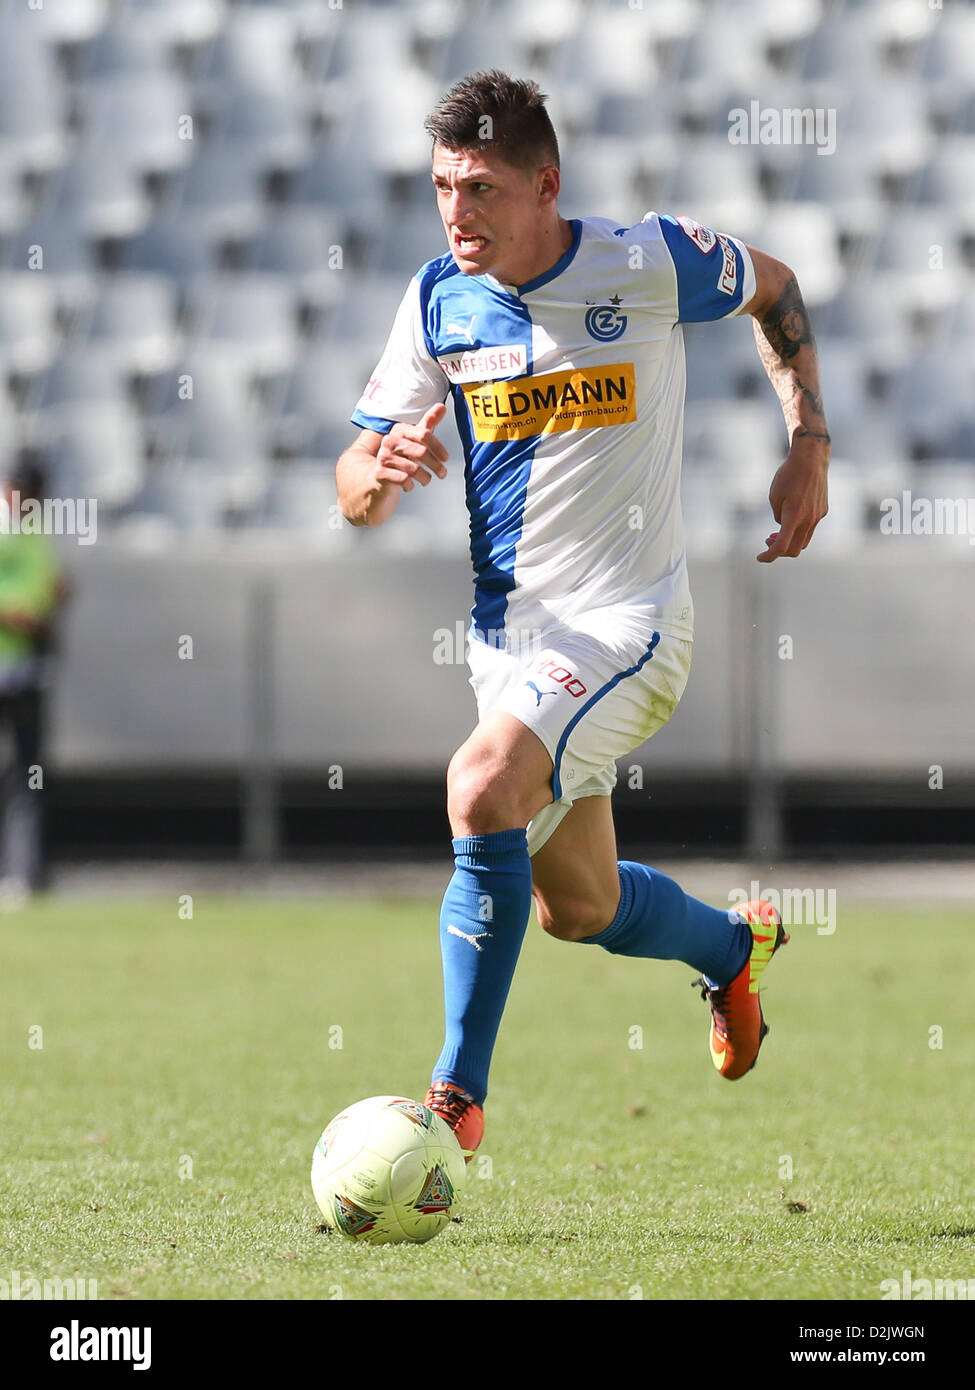 CAPE TOWN, South Africa - Saturday 26 January 2013, Steven Zuber of Grasshopper Club Zurich during the soccer/football match Grasshopper Club Zurich (Switzerland) and Ajax Cape Town at the Cape Town stadium. Photo by Roger Sedres/ImageSA/ Alamy Live News Stock Photo